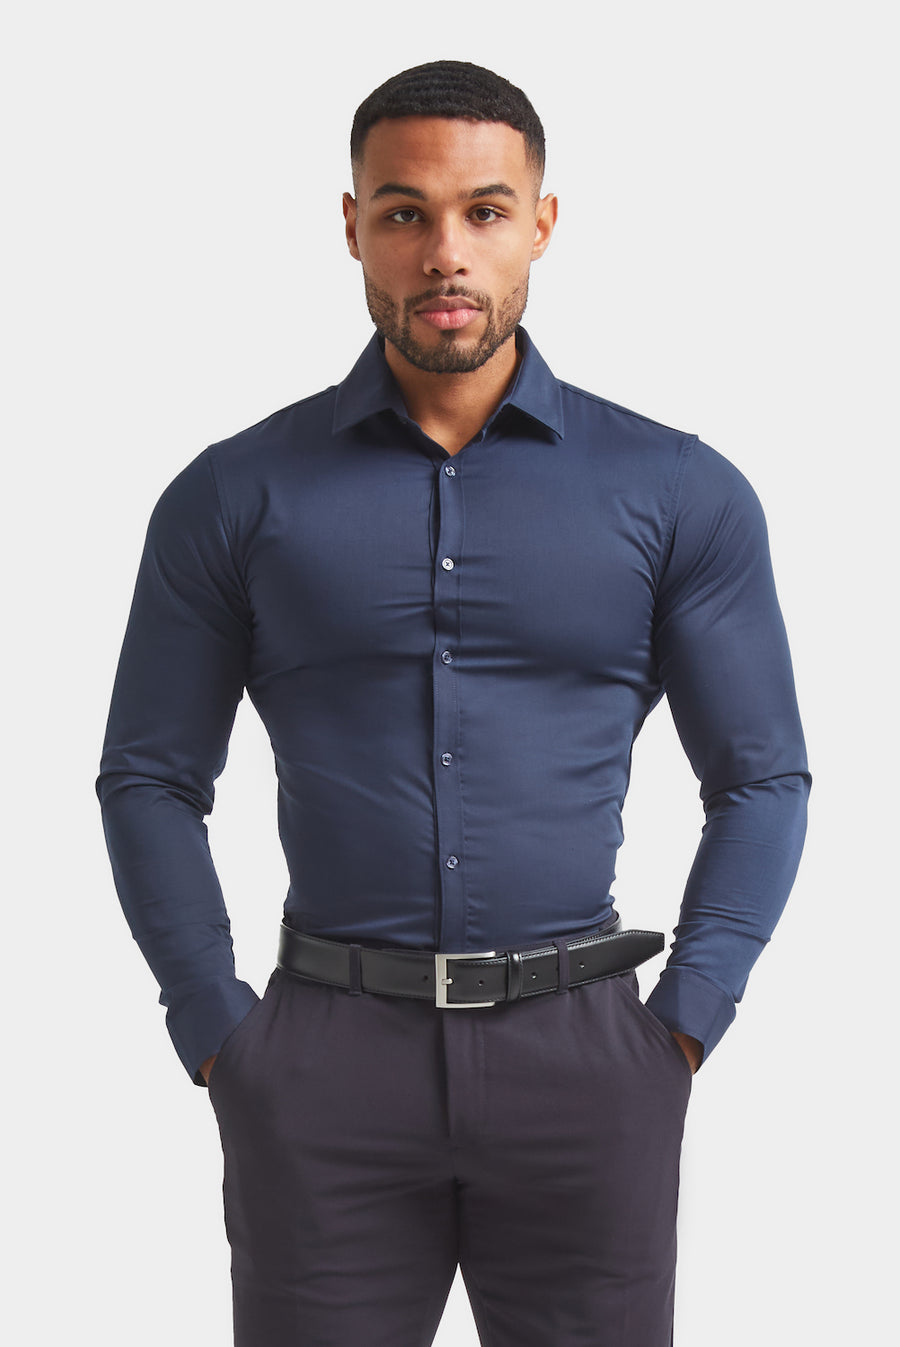 Muscle Fit Signature Shirt 2.0 in Burgundy - TAILORED ATHLETE - USA